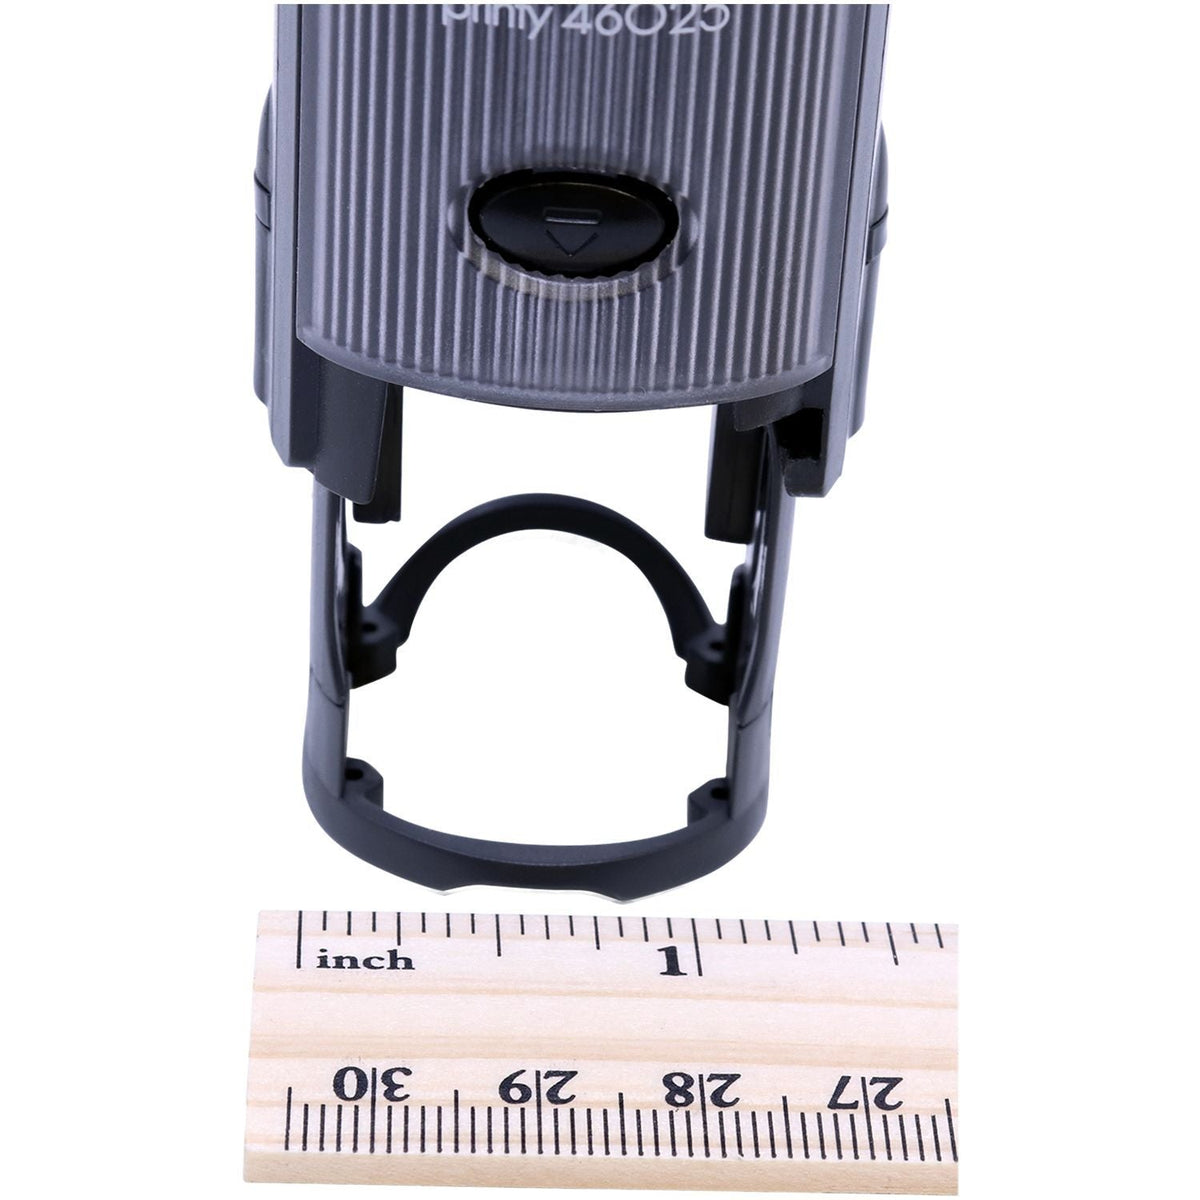 Measurment of Self-Inking Round Bravo Stamp with Ruler